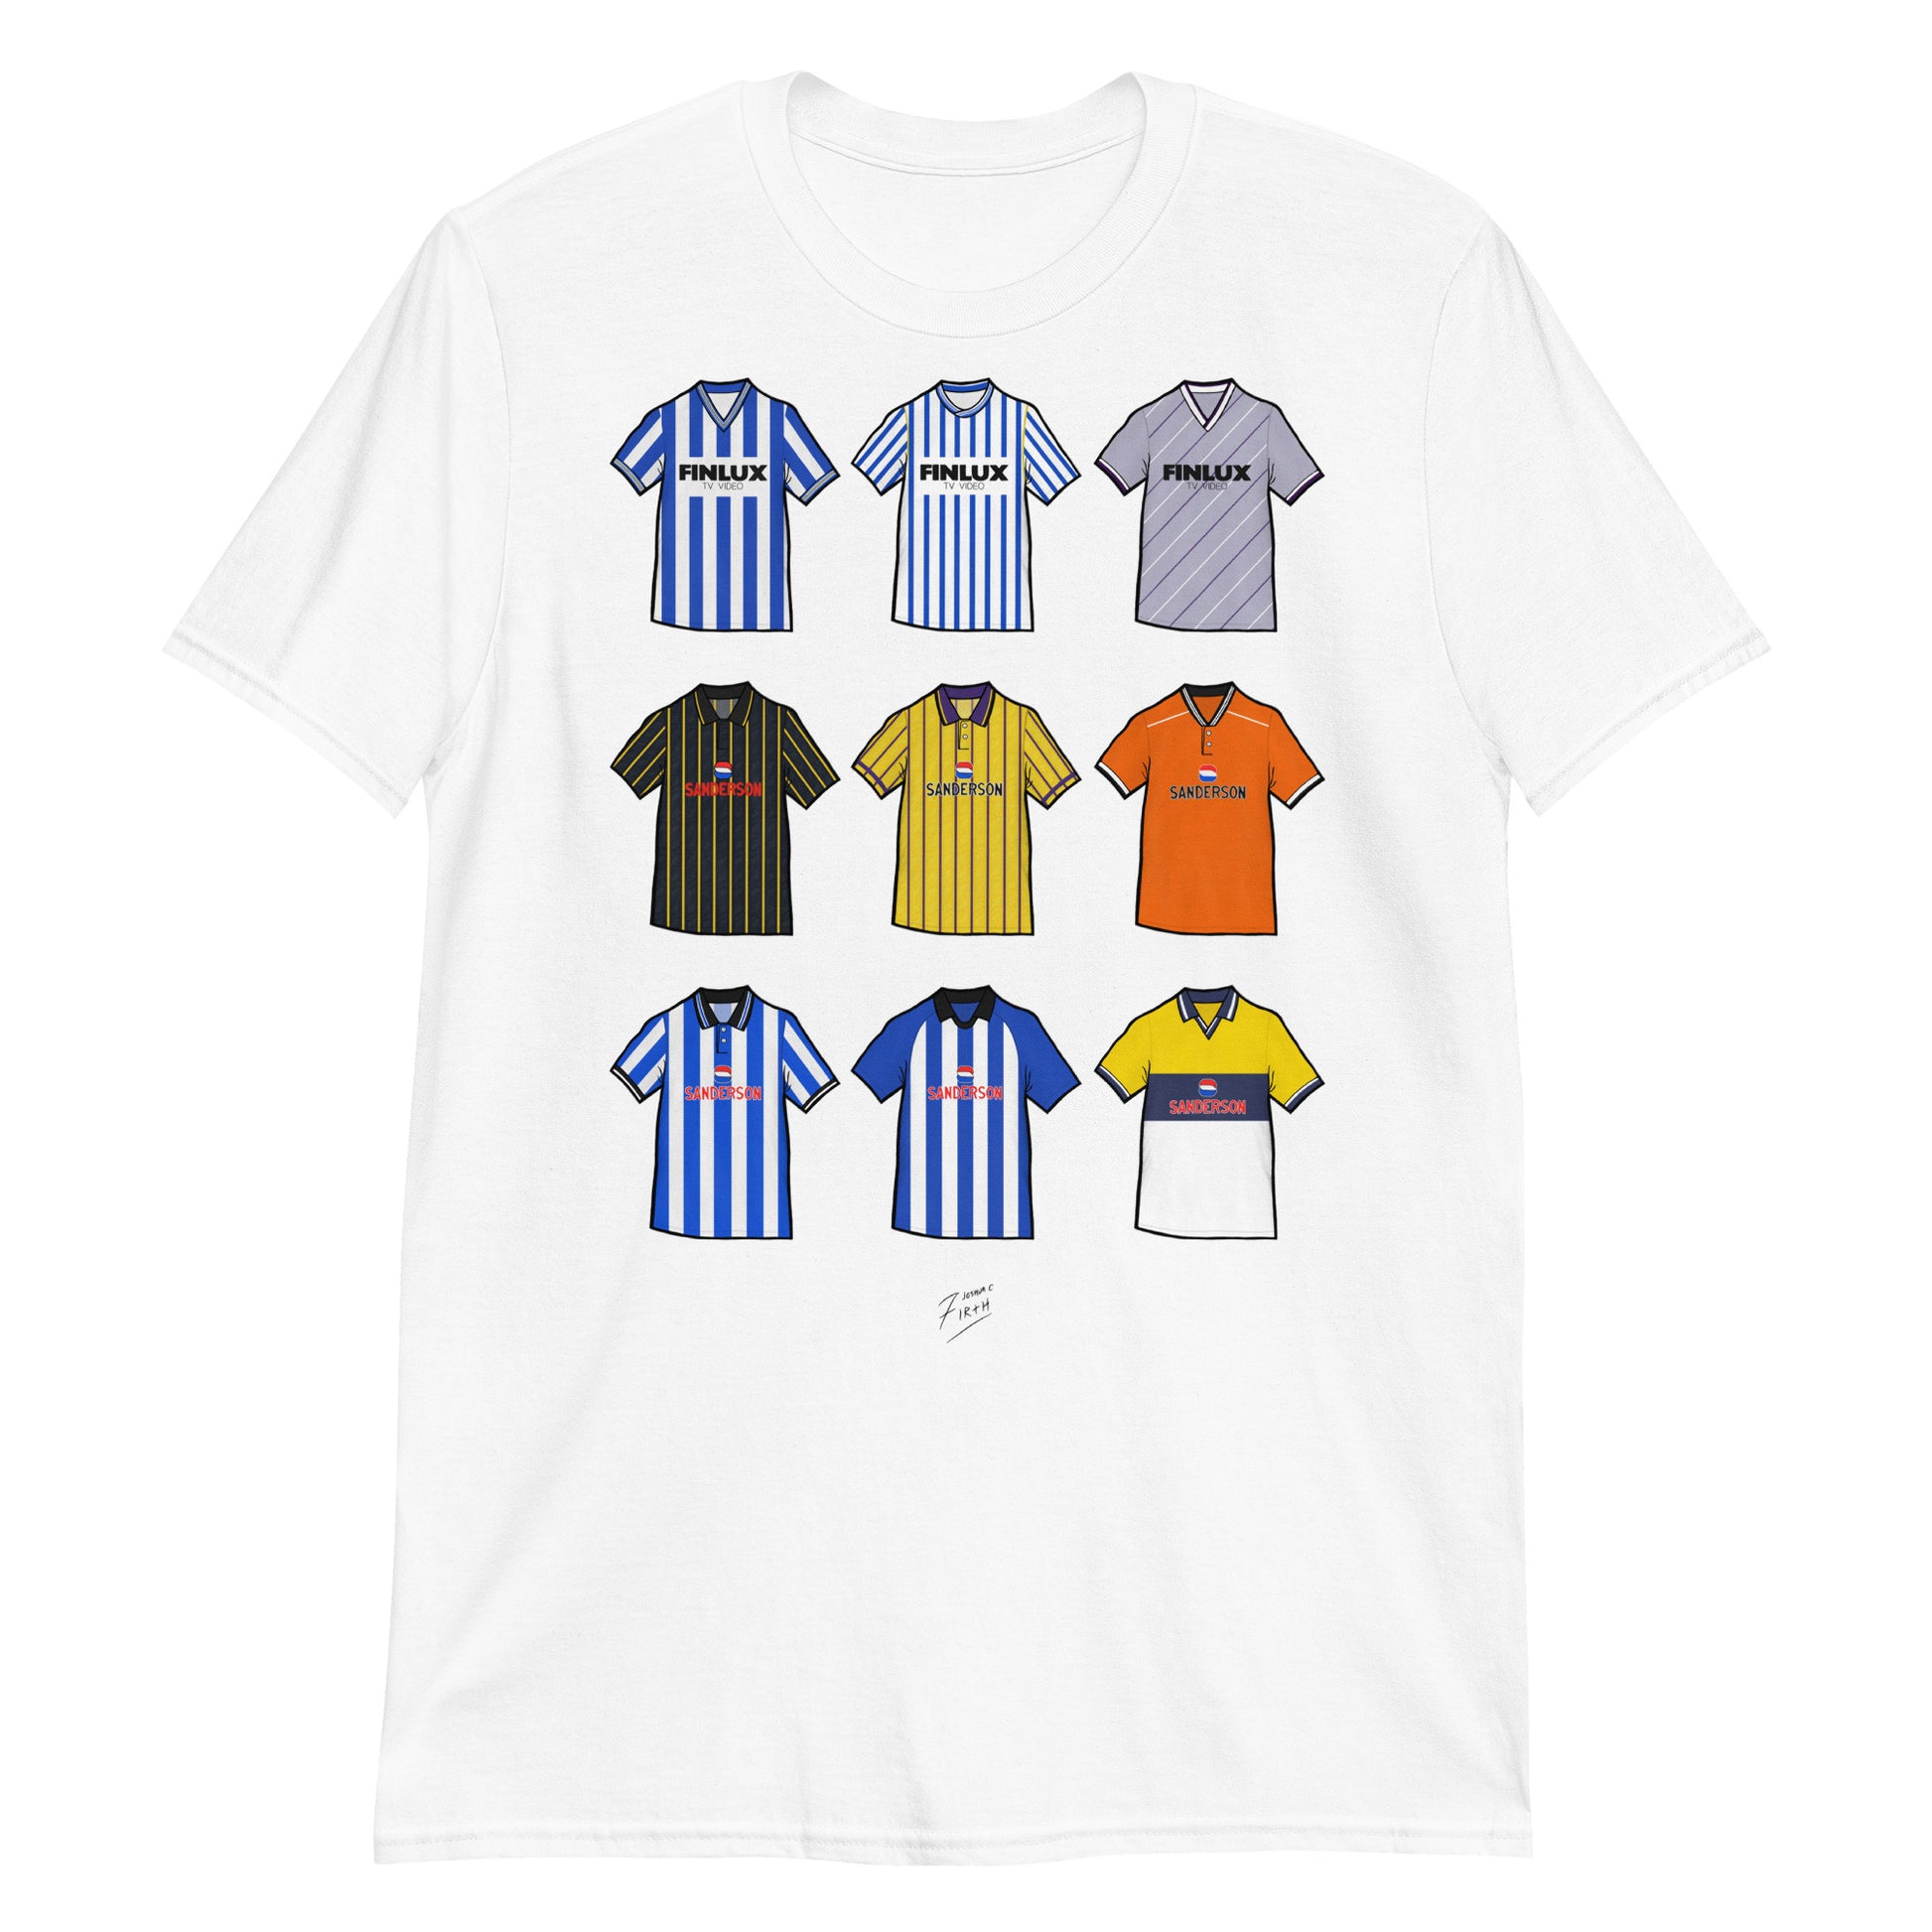 White Sheffield Wednesday themed T-shirt inspired by their famous retro jerseys of the past! 